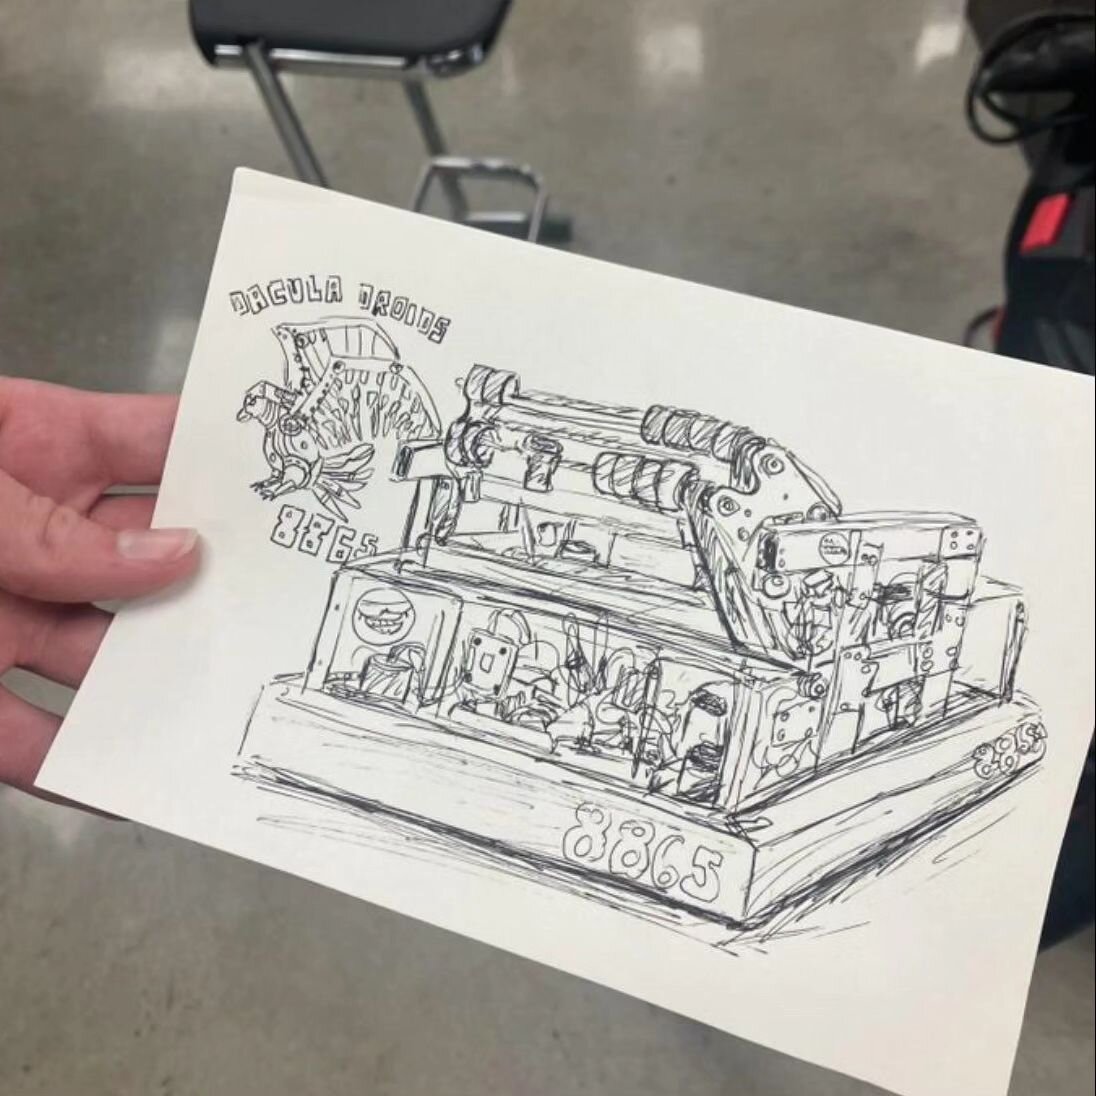 Another incredible drawing of @dacula_robotics by @2974walt!

Love this art + robots creation!